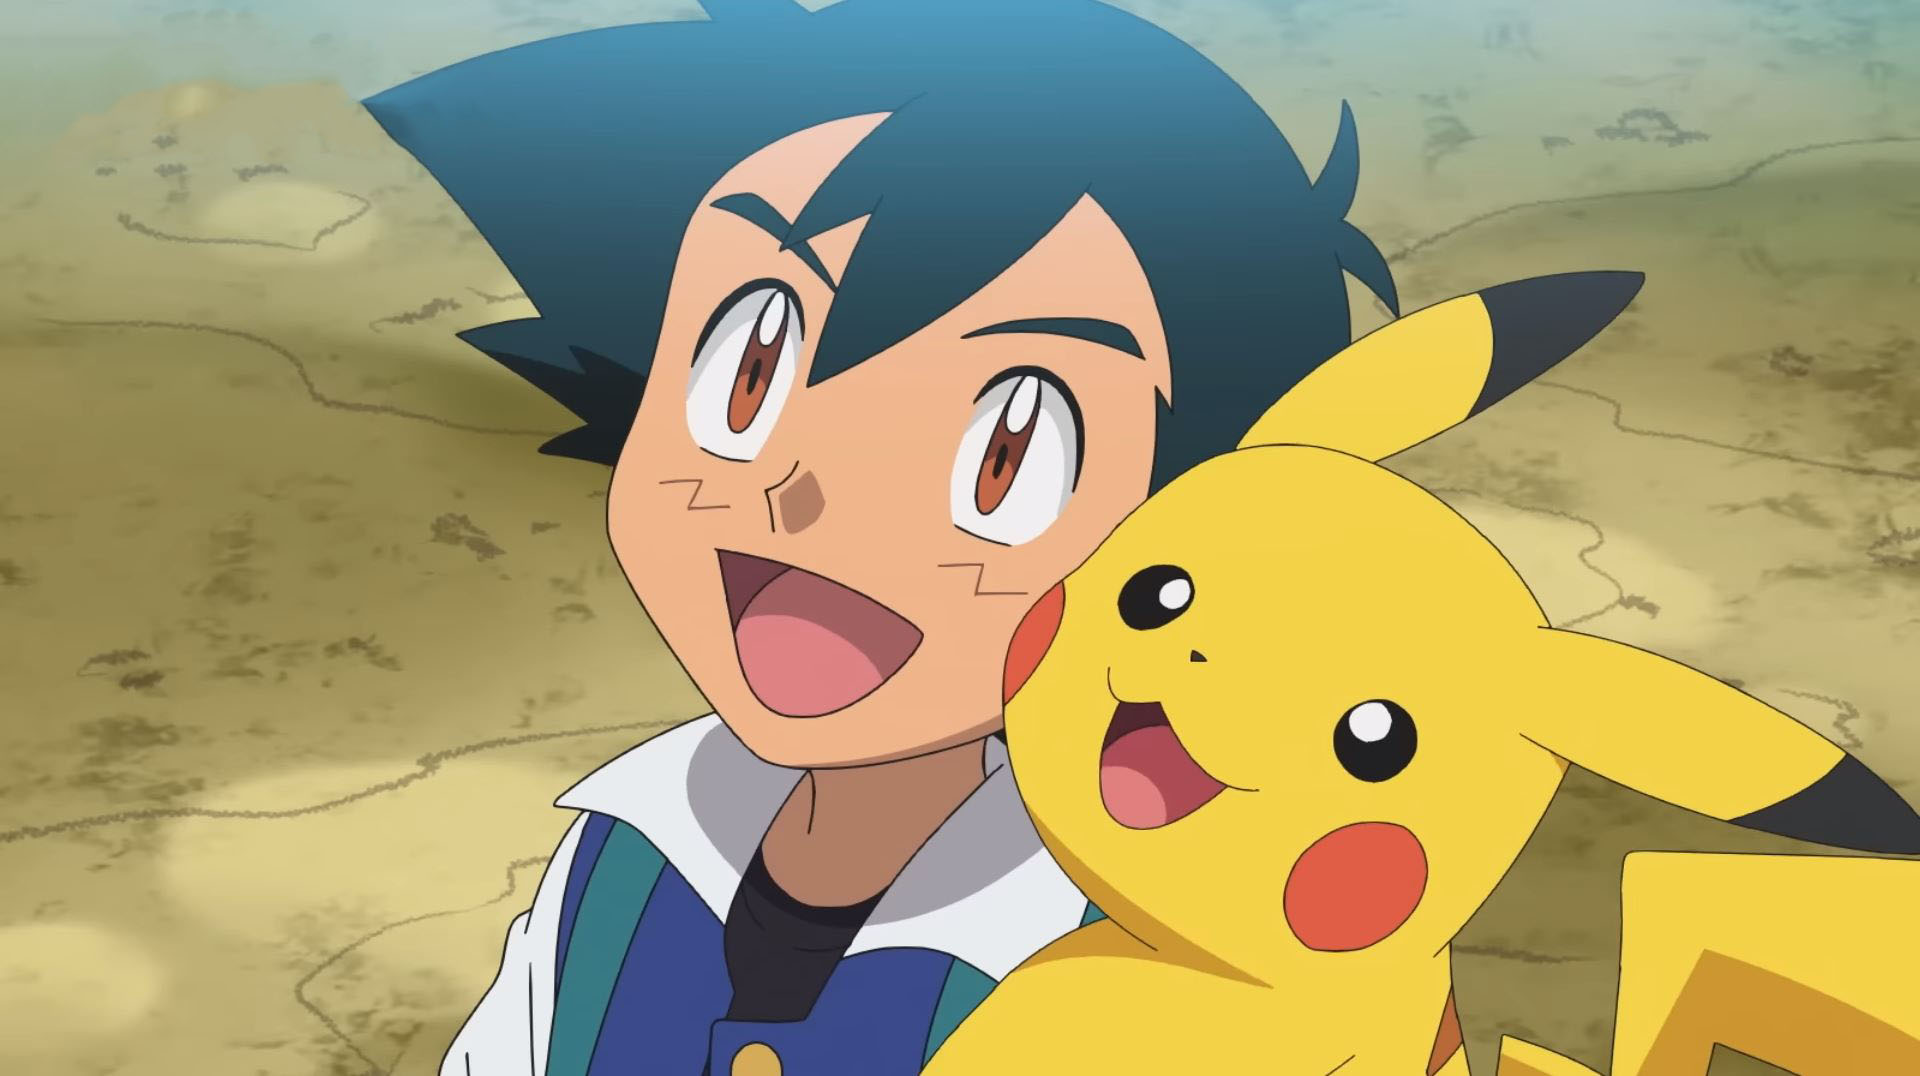 Pokemon anime is retiring Ash and Pikachu after 25 years